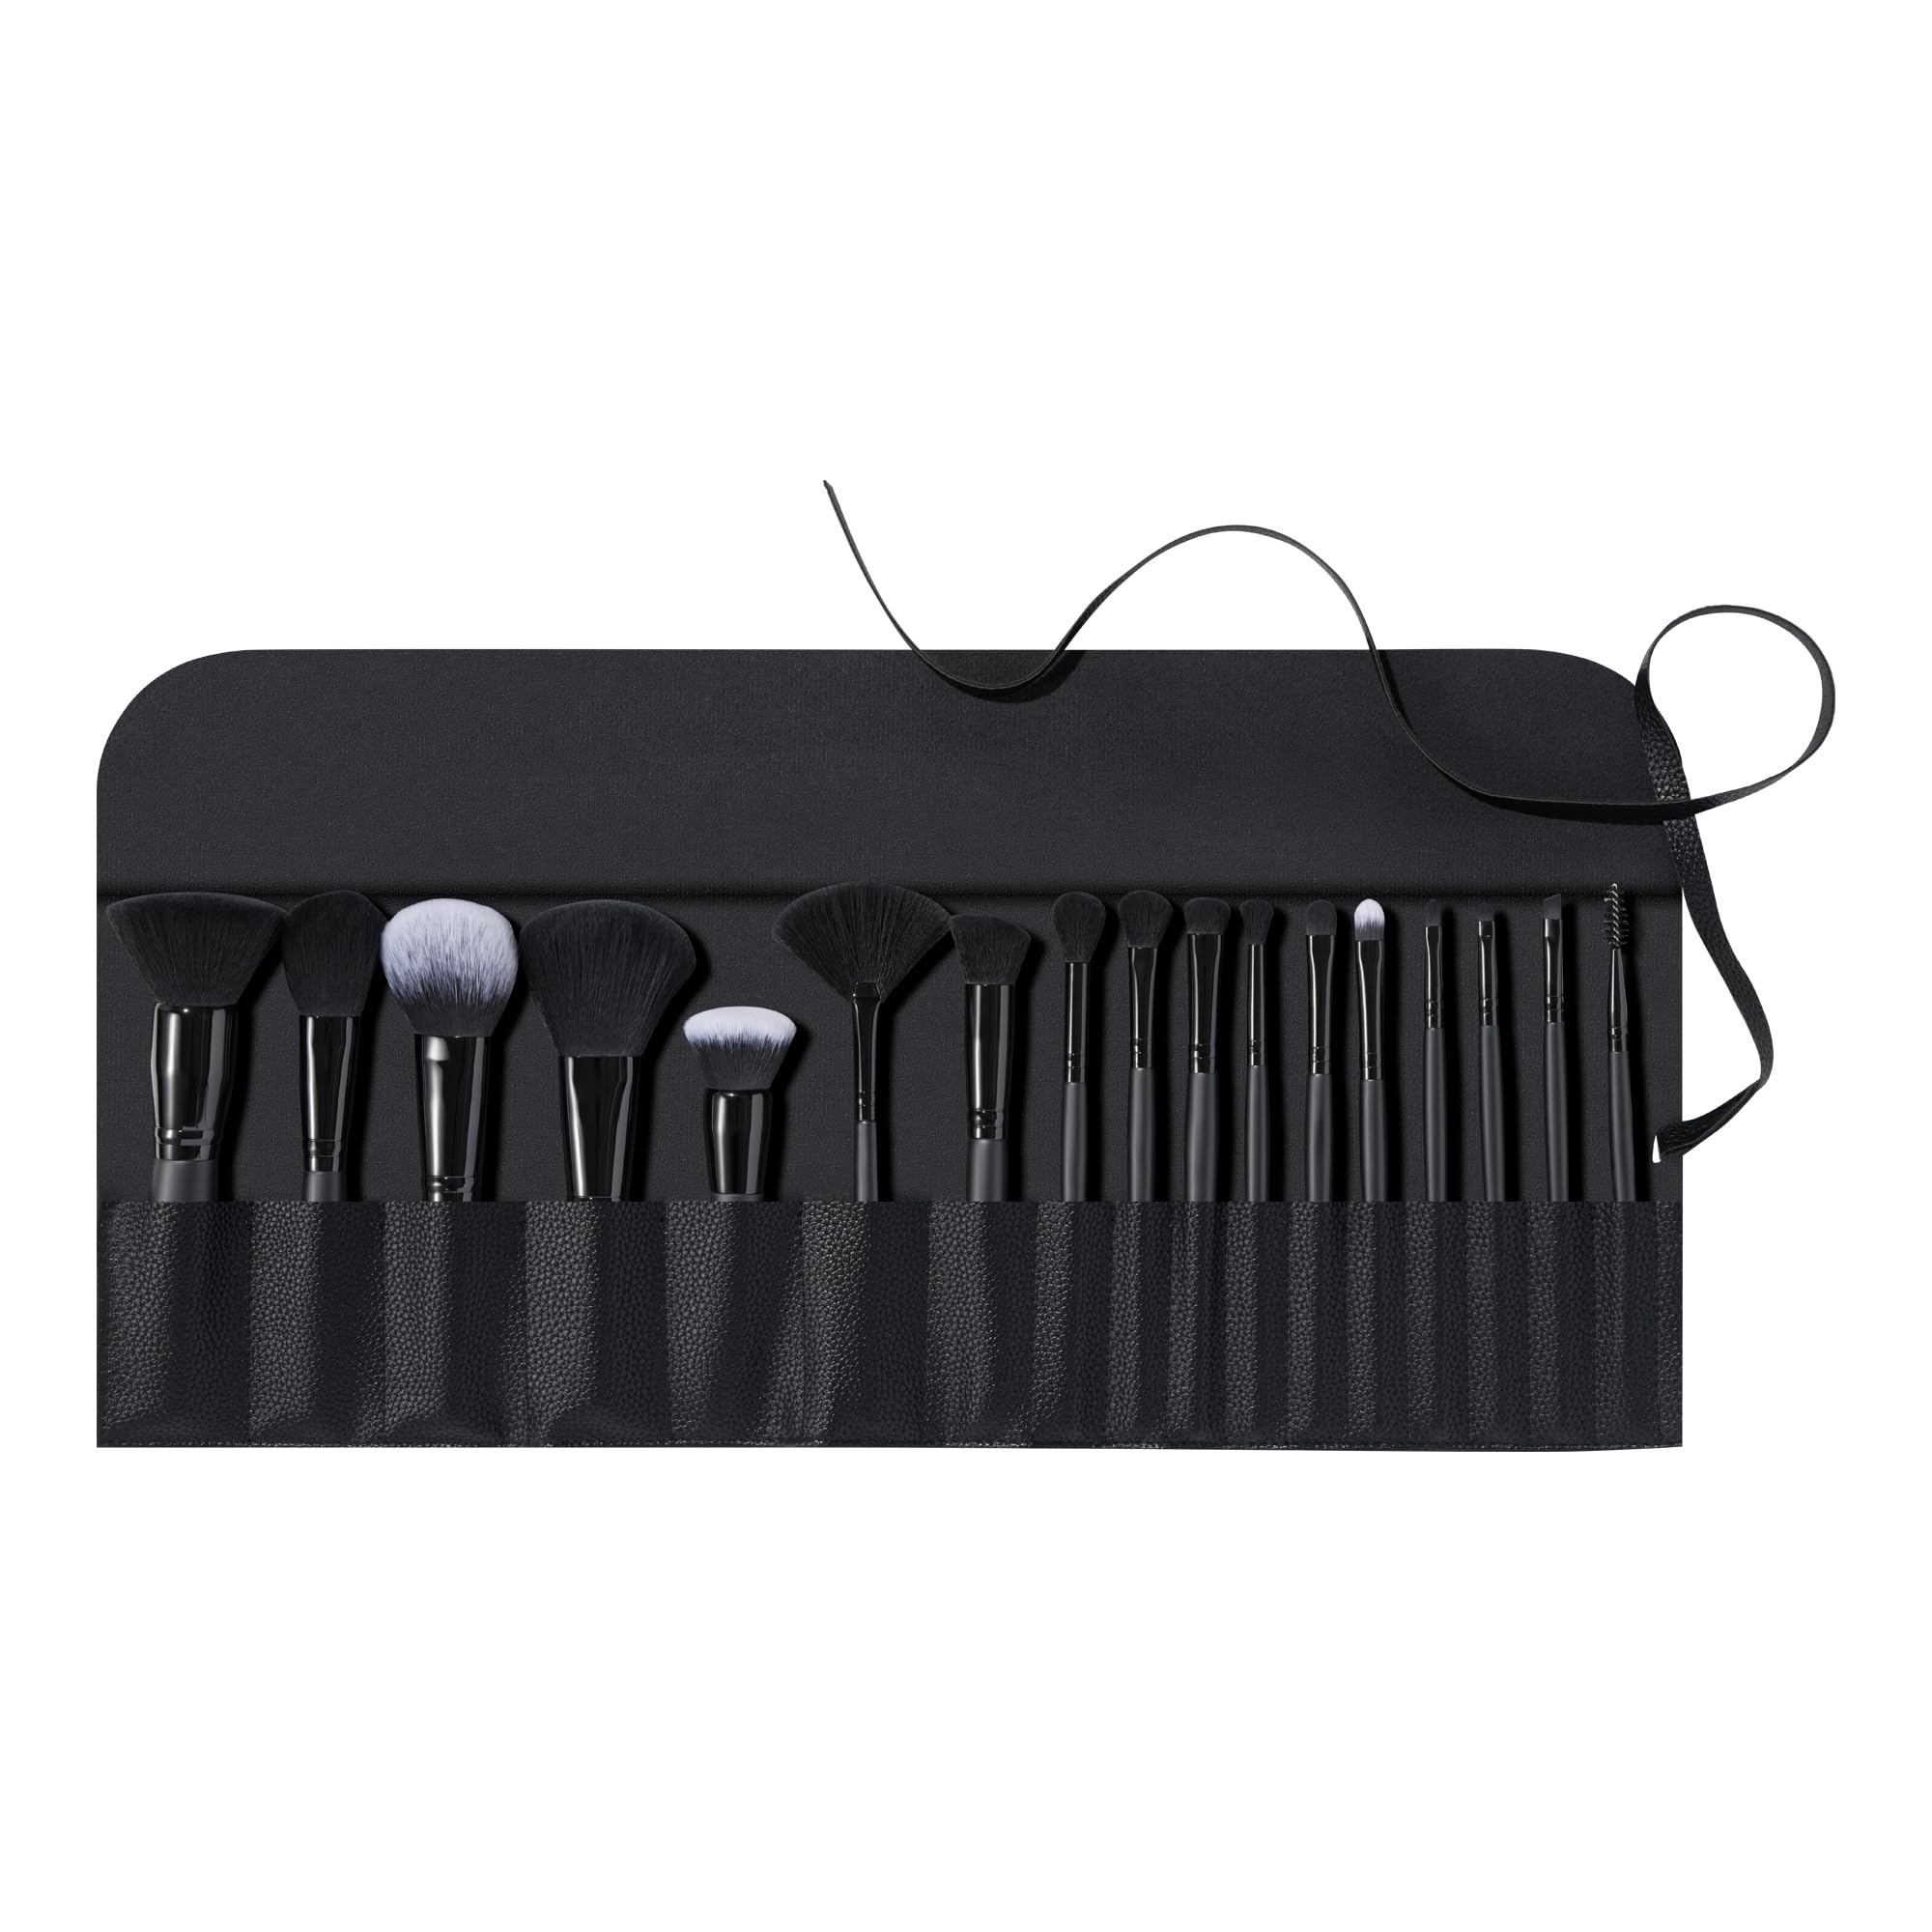 e.l.f. Ultimate Makeup Brush Set & Travel Roll, 17-Piece Brush Kit, Brushes For Eyeshadow, Foundation, Powder, Concealer & more, Vegan & Cruelty-free